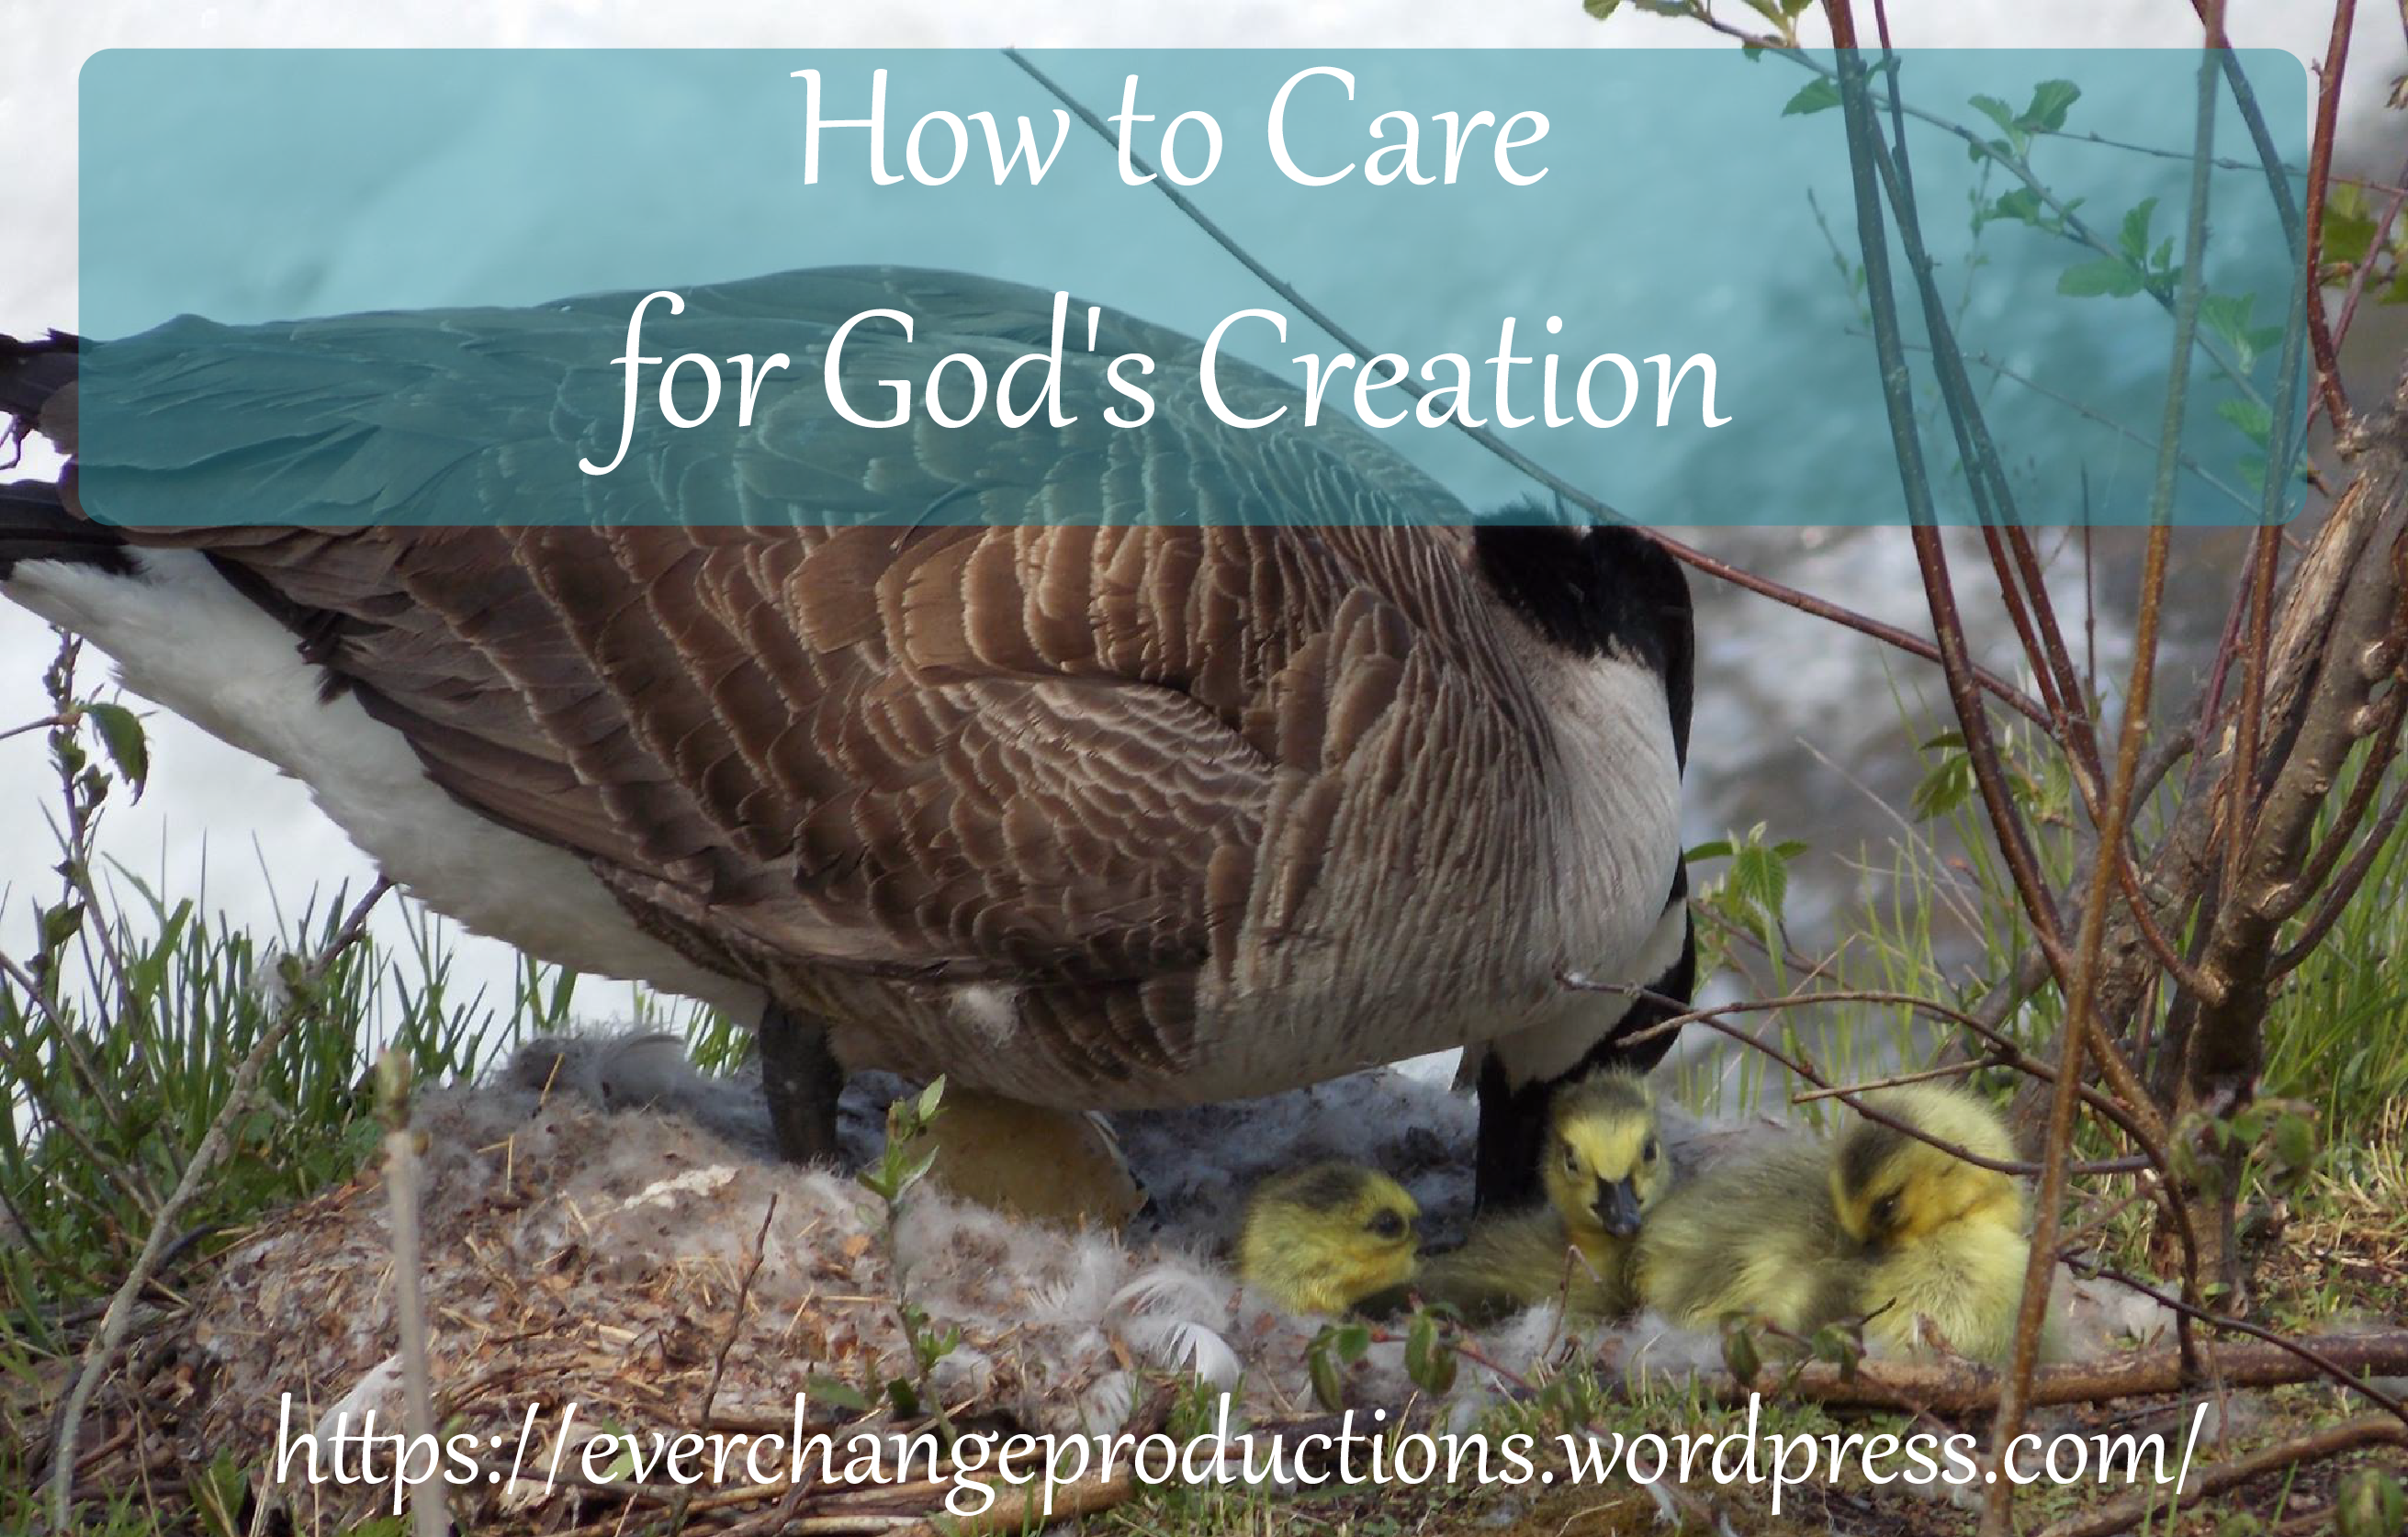 How to Care for God's Creation